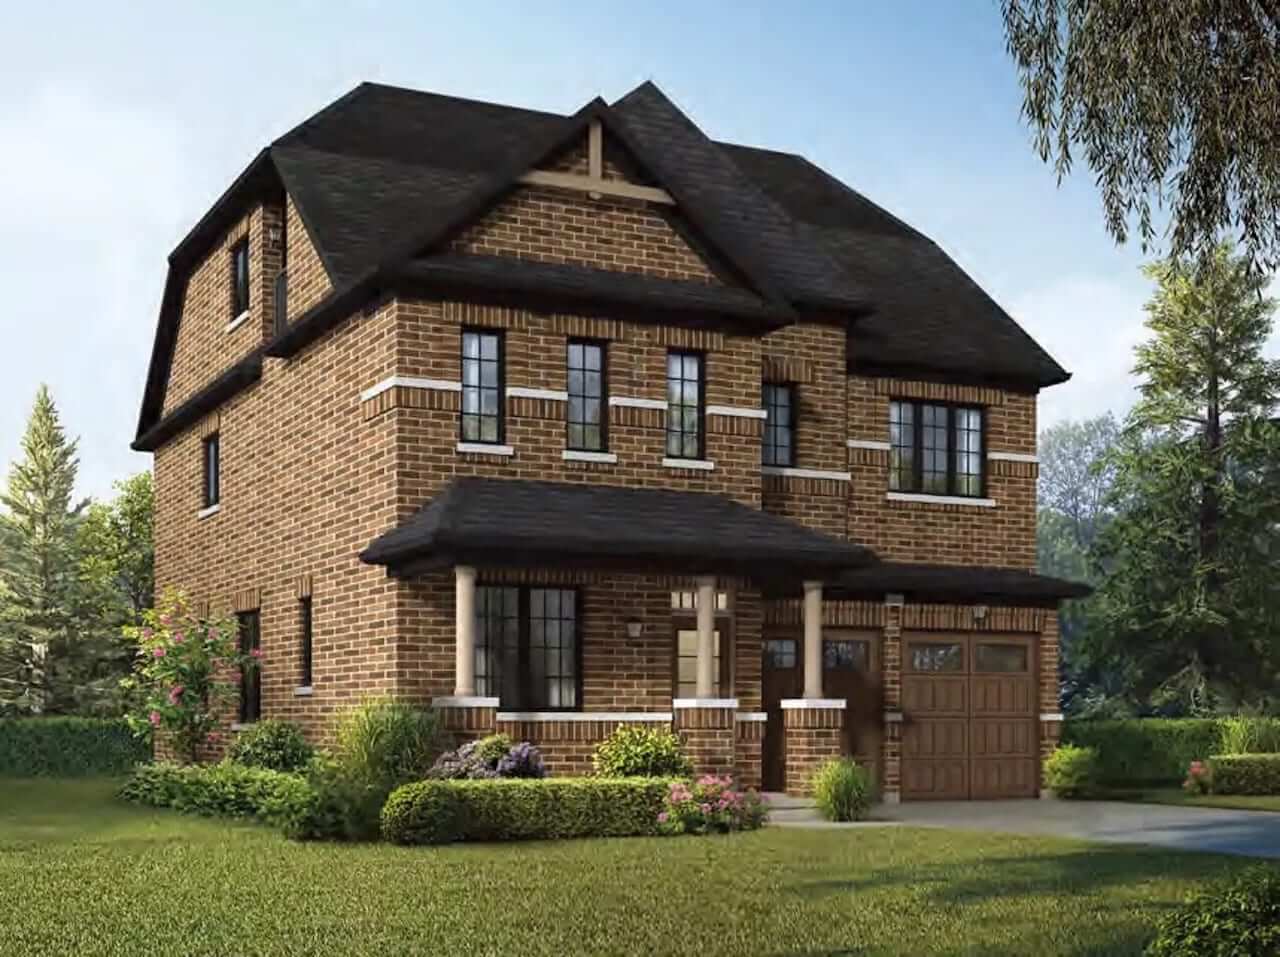 Rendering of Victory Green single home exterior